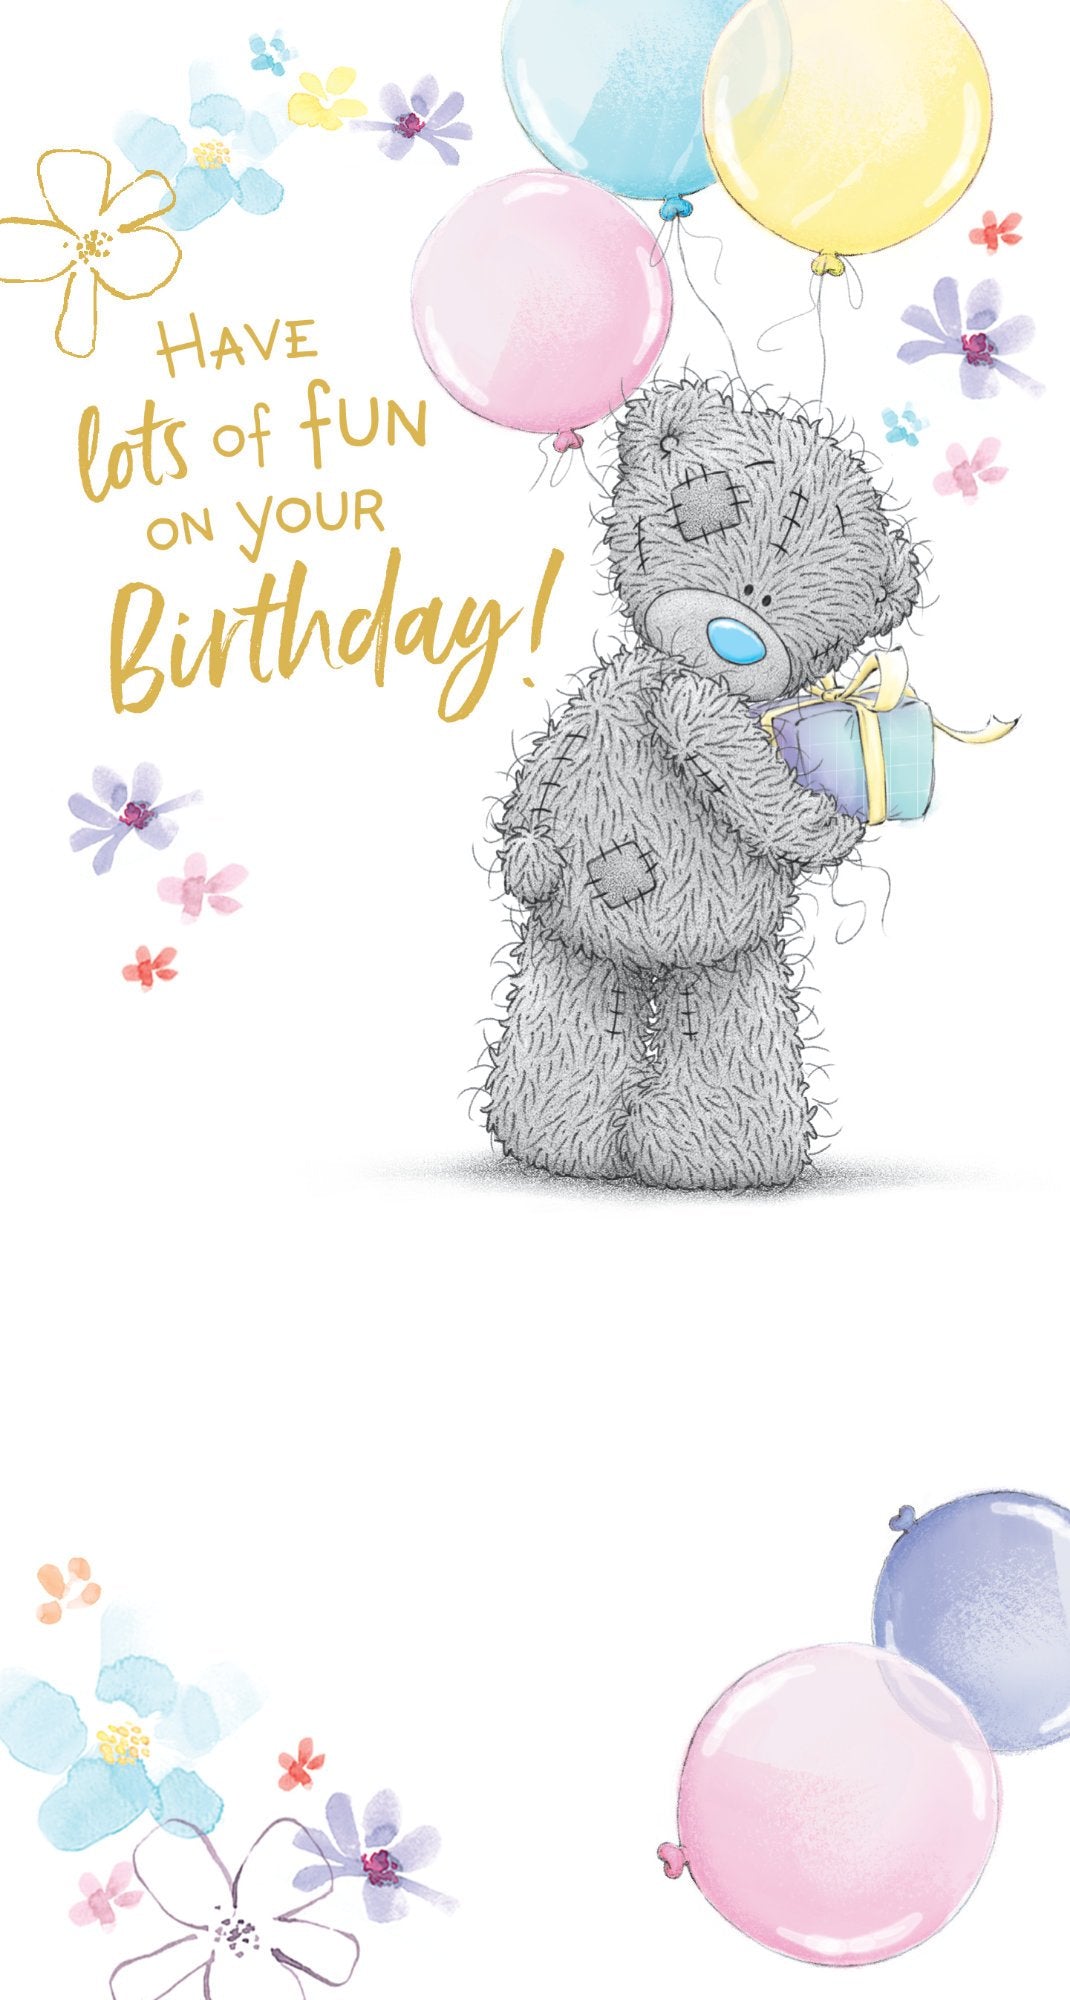 Photograph of Bear With Present And Balloons Greetings Card at Nicole's Shop